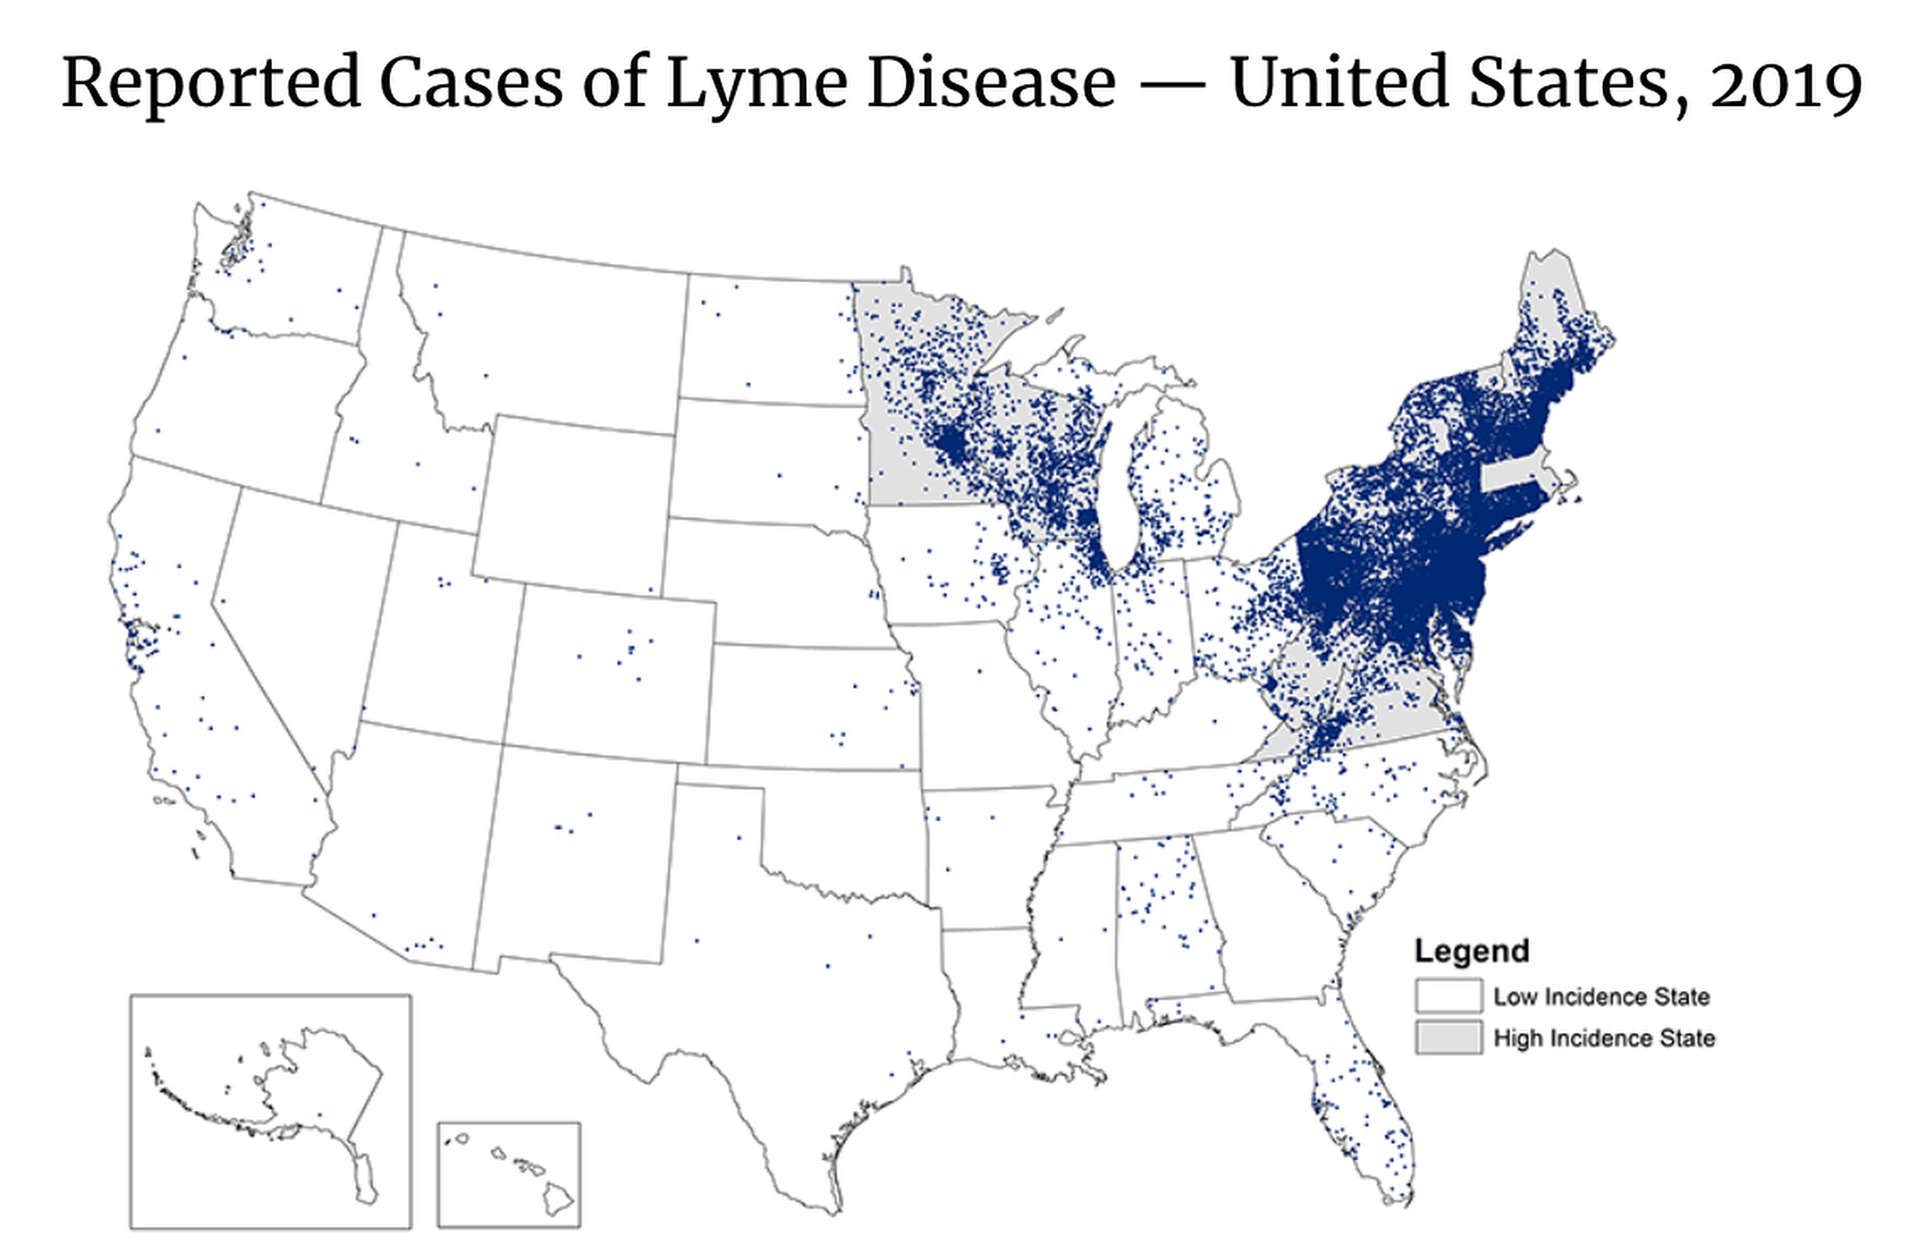 A dot map shows the location of reported cases of Lyme disease across the United States in 2019, with low incidence states having a white background and high incidence states having a gray background.